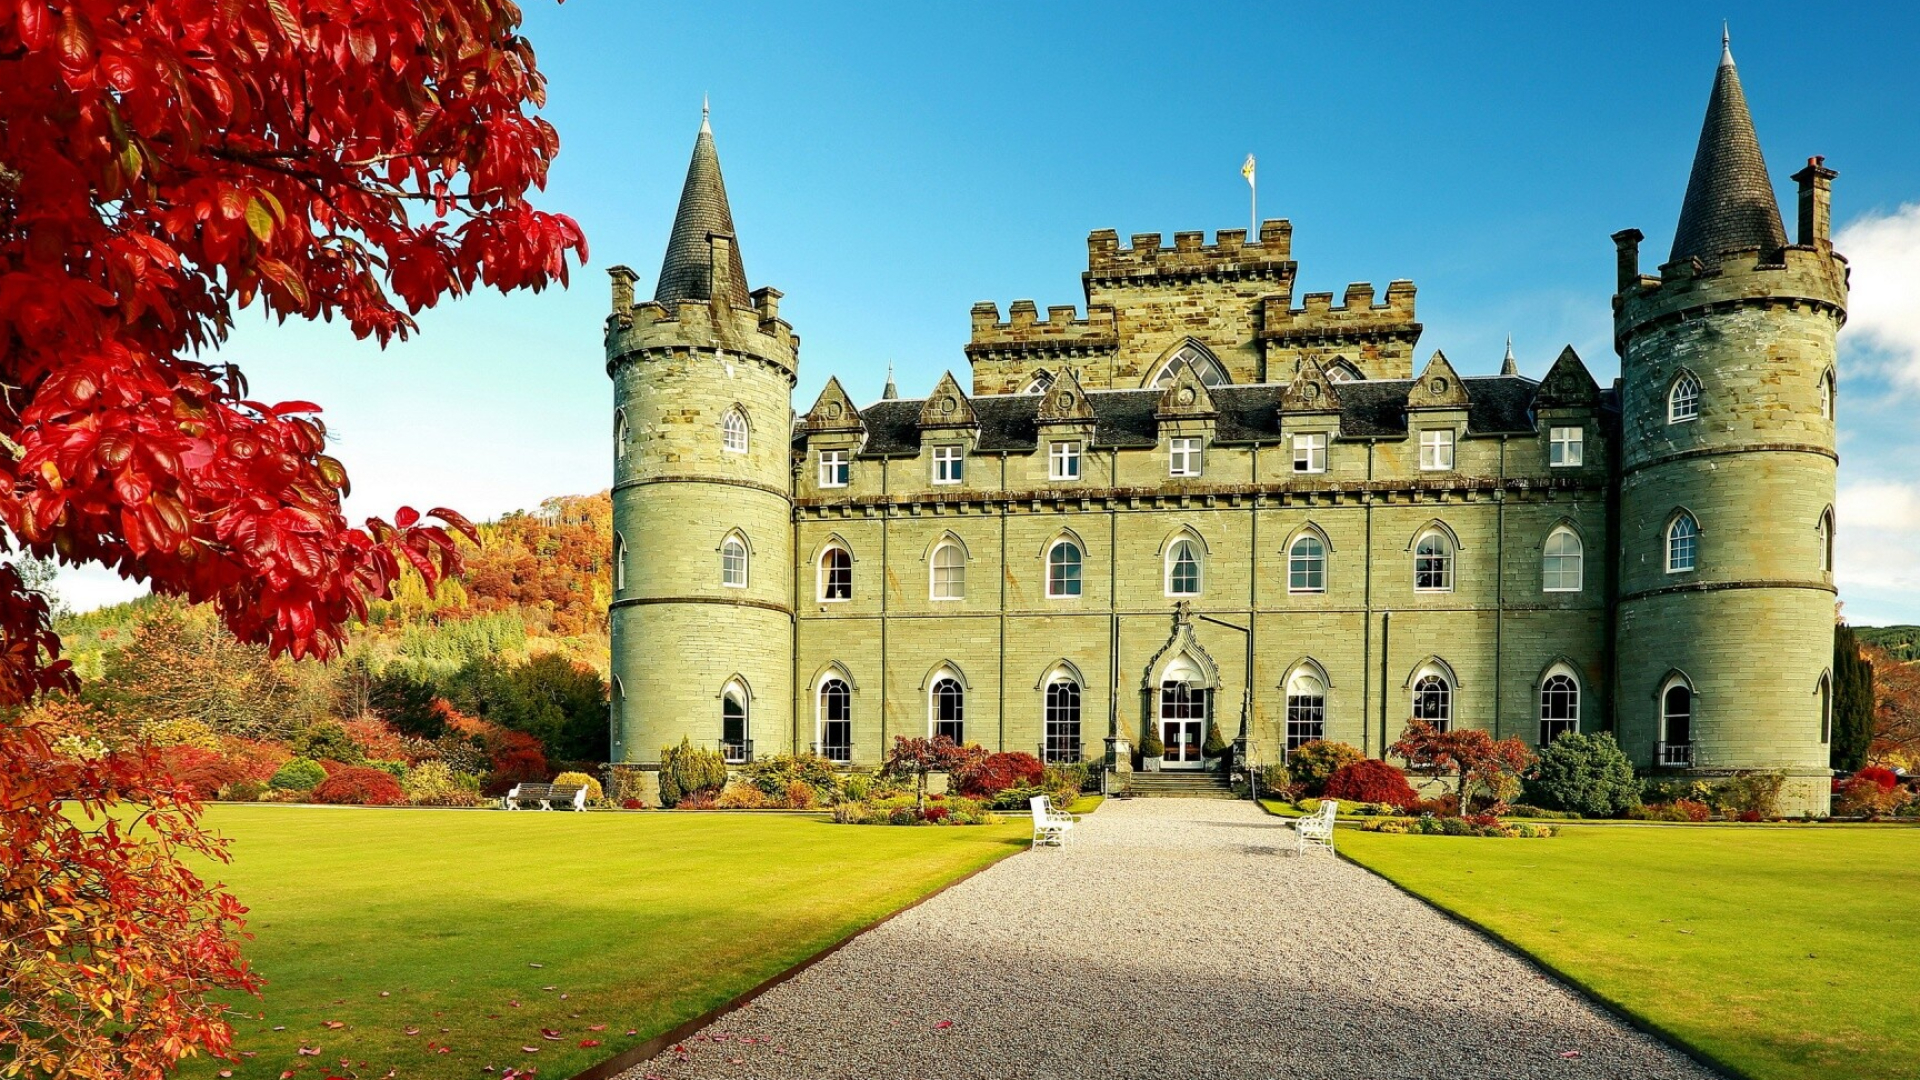 United Kingdom: Inveraray Castle, The country occupies the major part of the British Isles. 1920x1080 Full HD Background.